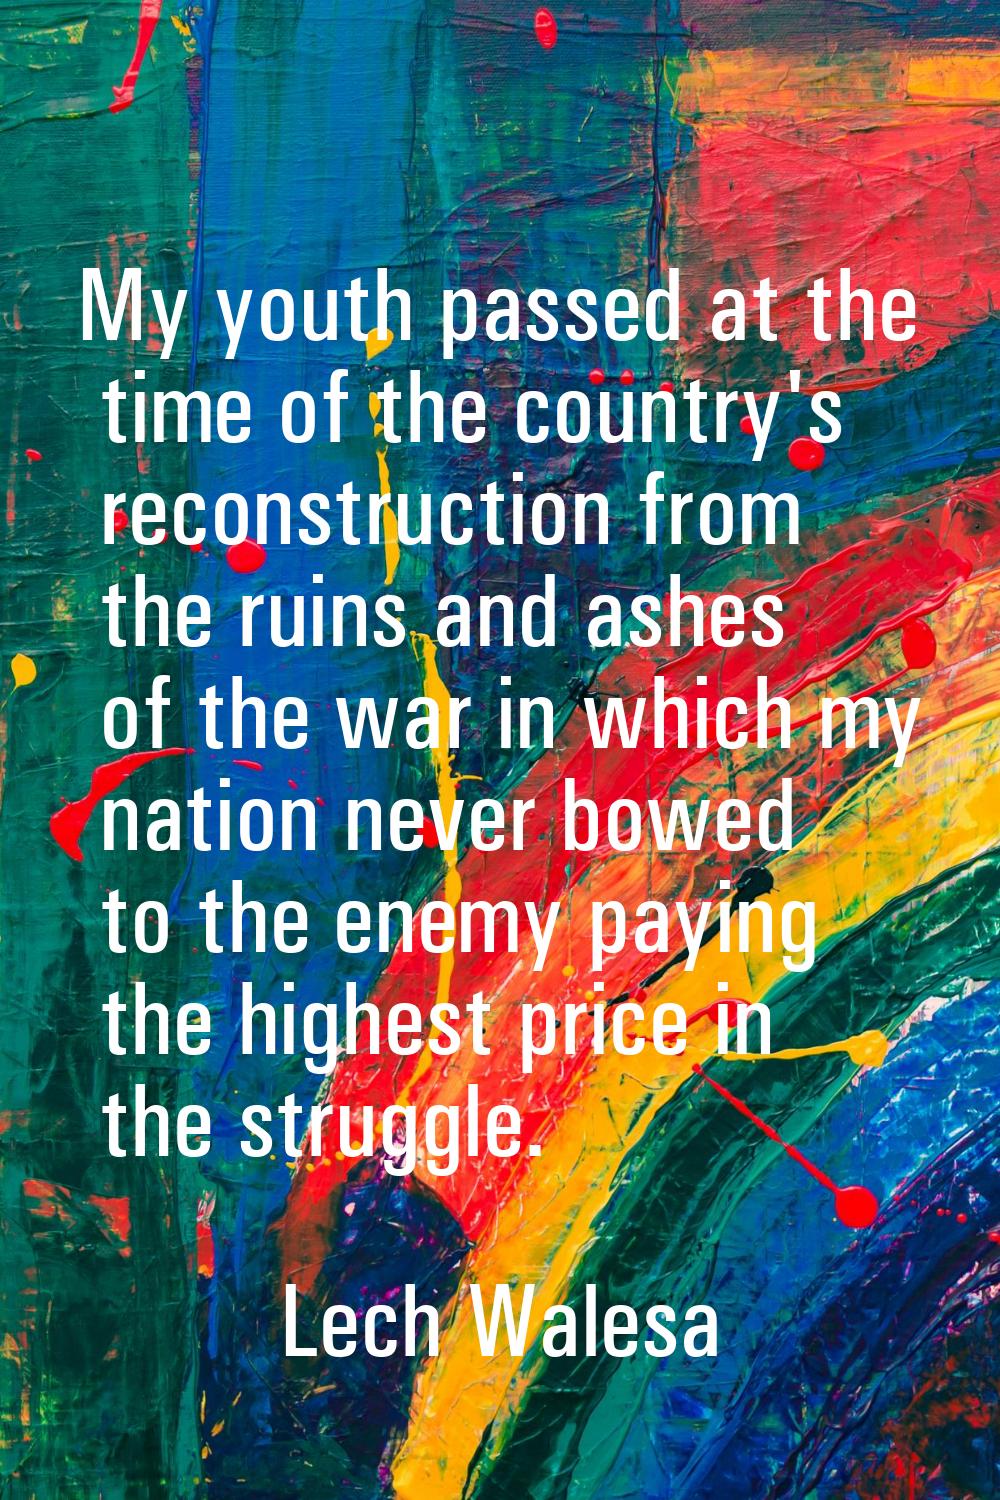 My youth passed at the time of the country's reconstruction from the ruins and ashes of the war in 